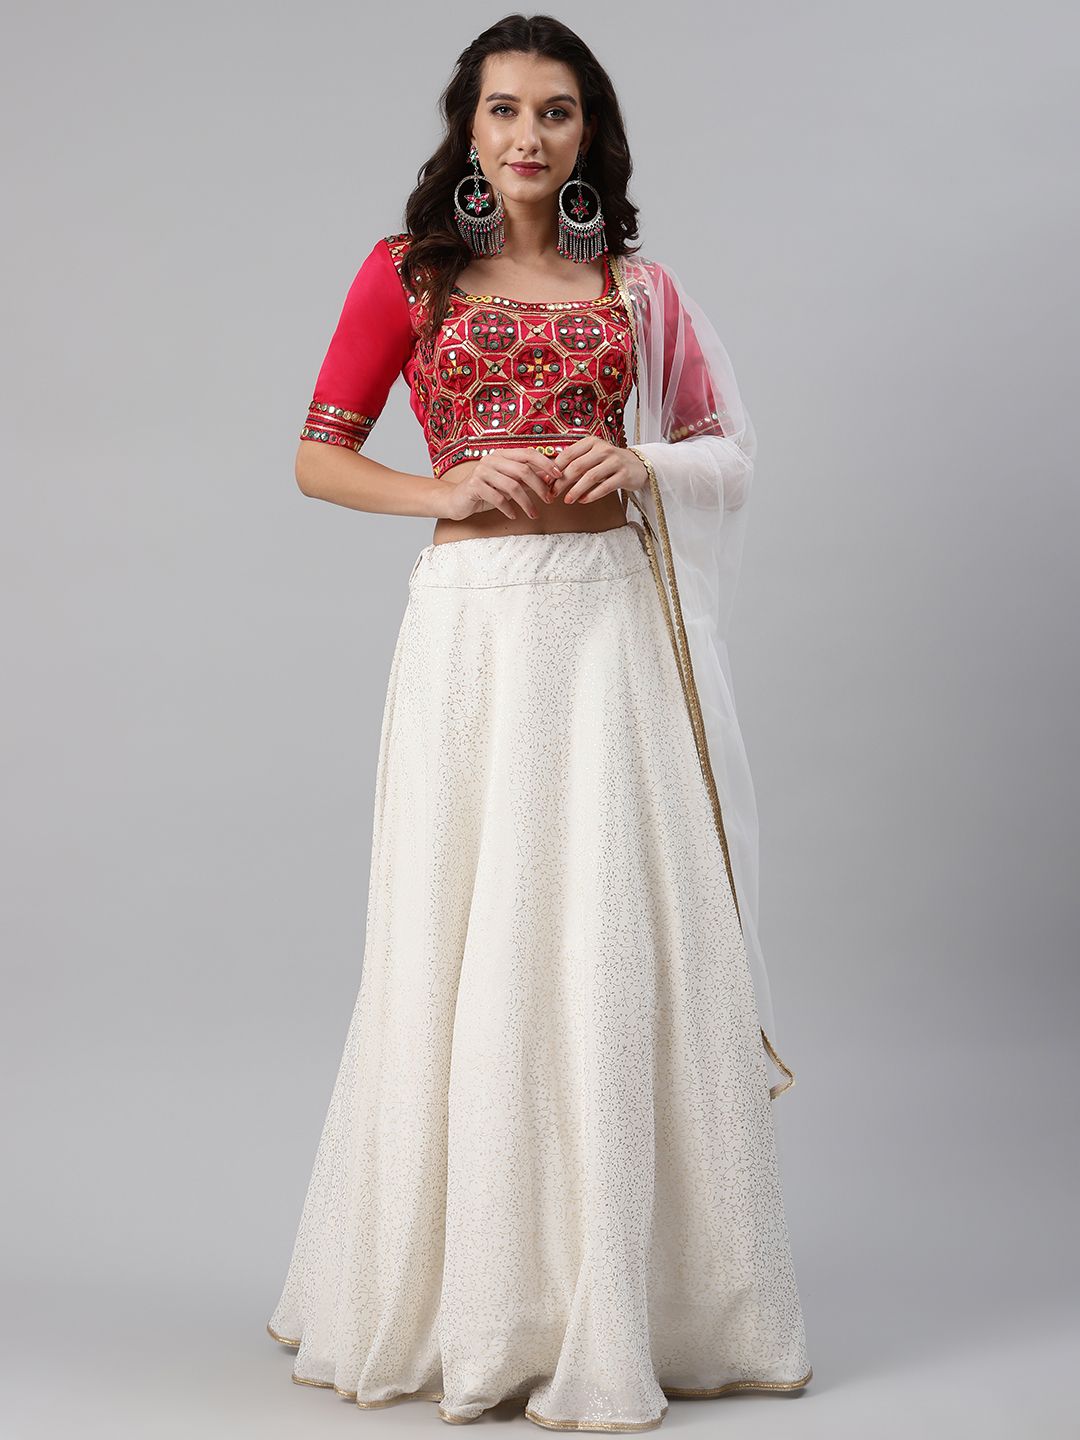 SHUBHKALA White & Golden Foil Print Semi-Stitched Lehenga & Unstitched Blouse with Dupatta Price in India